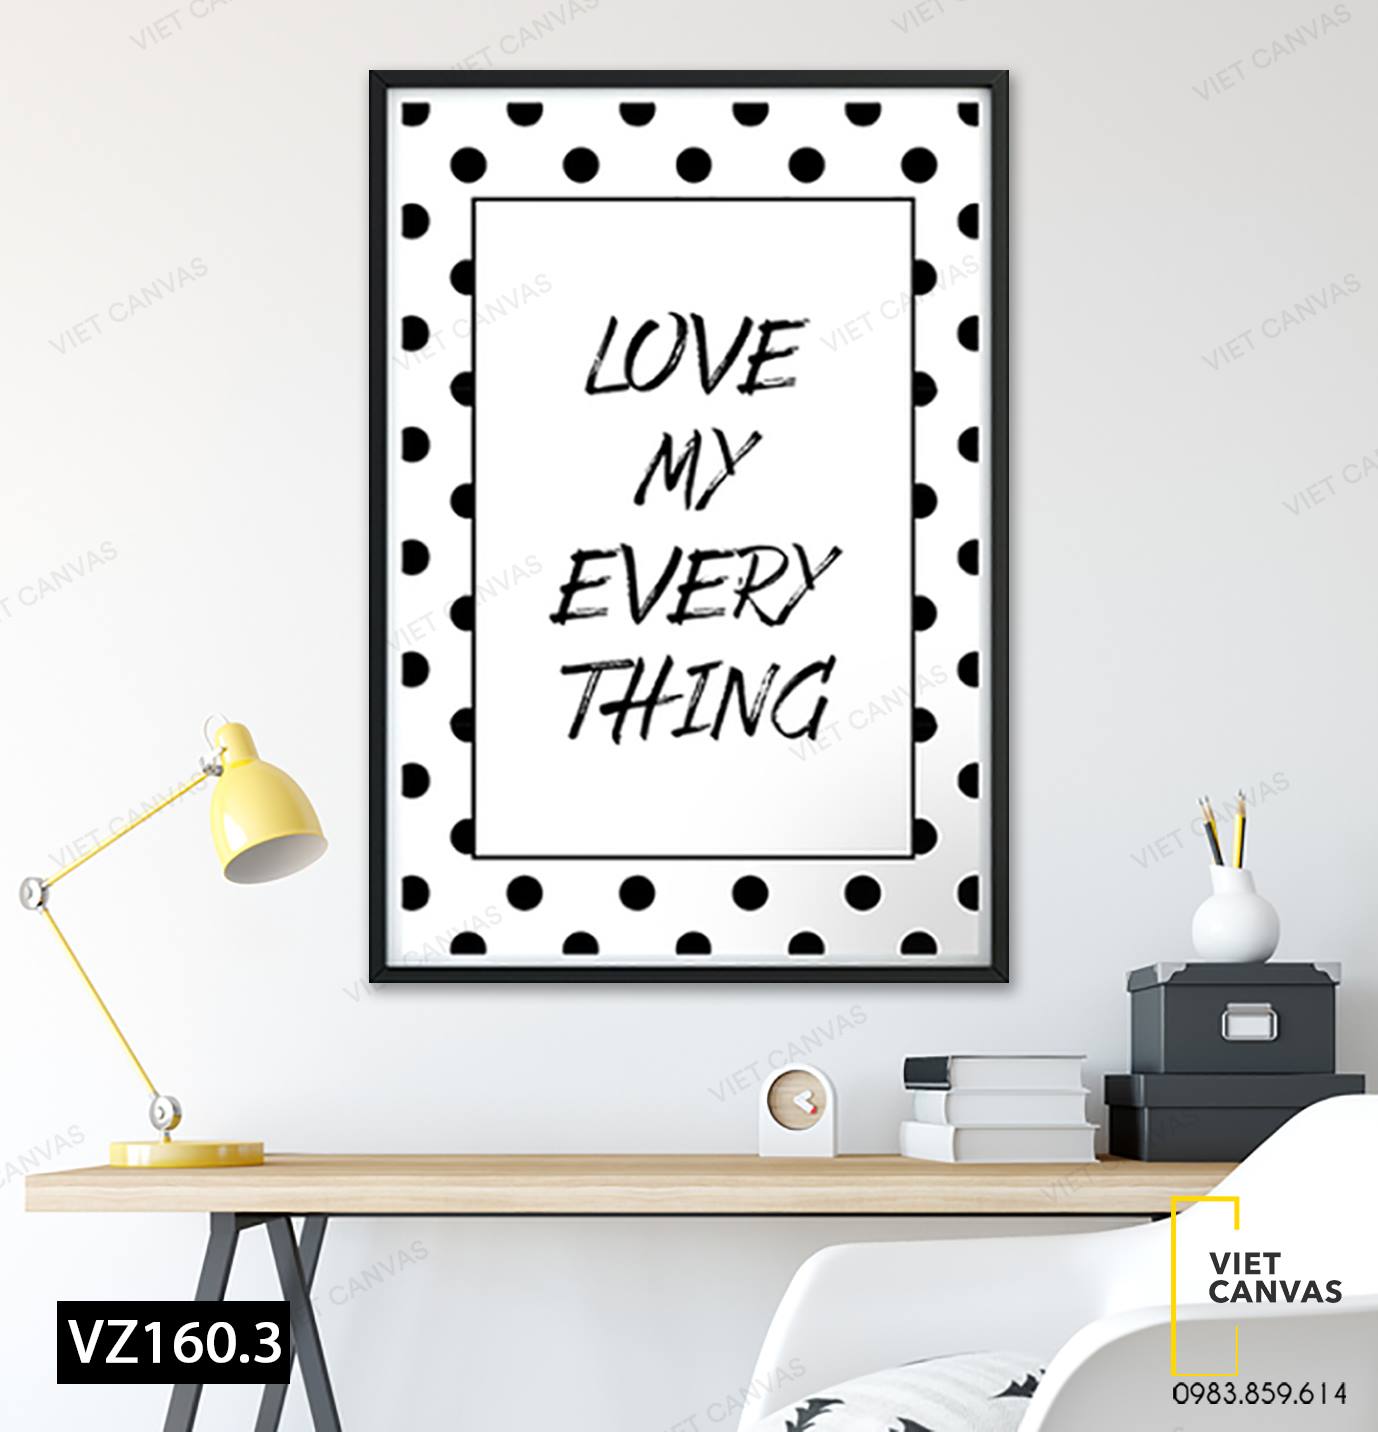 Tranh Quotes Love My Everything - VZ160.3